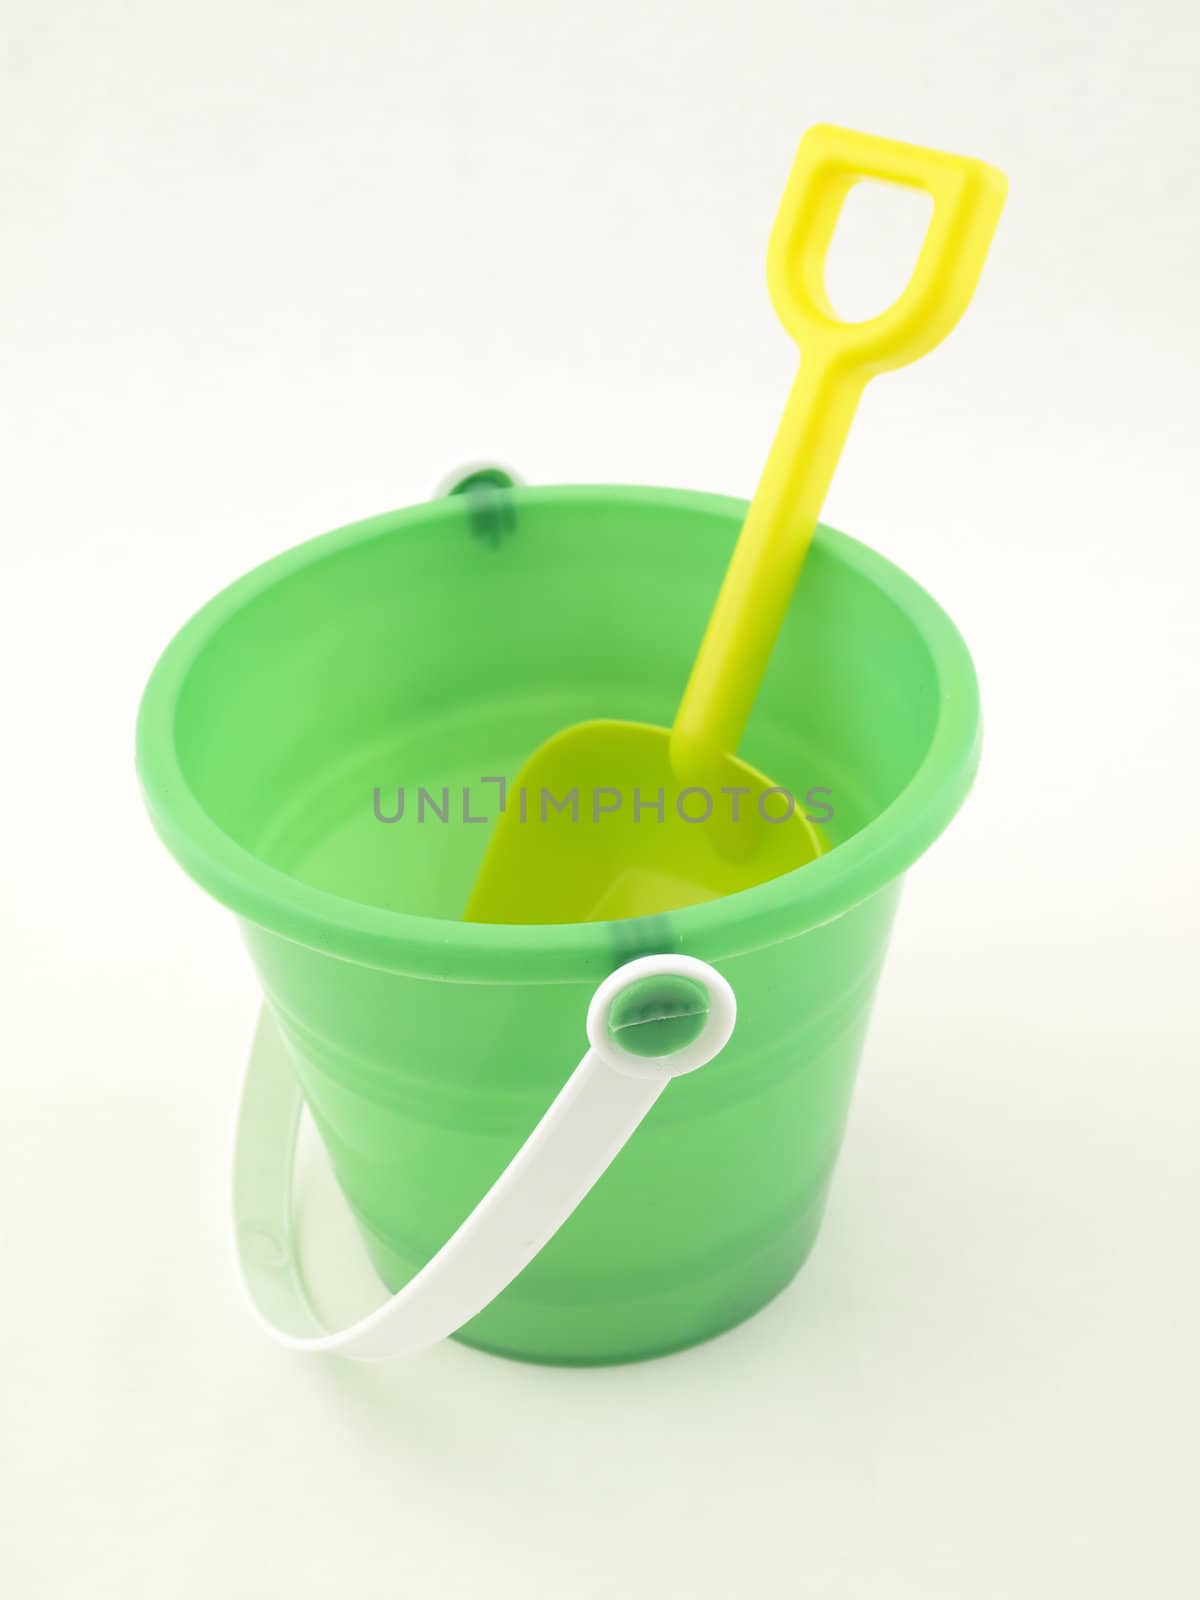 Plastic bucket and shovel by RGebbiePhoto